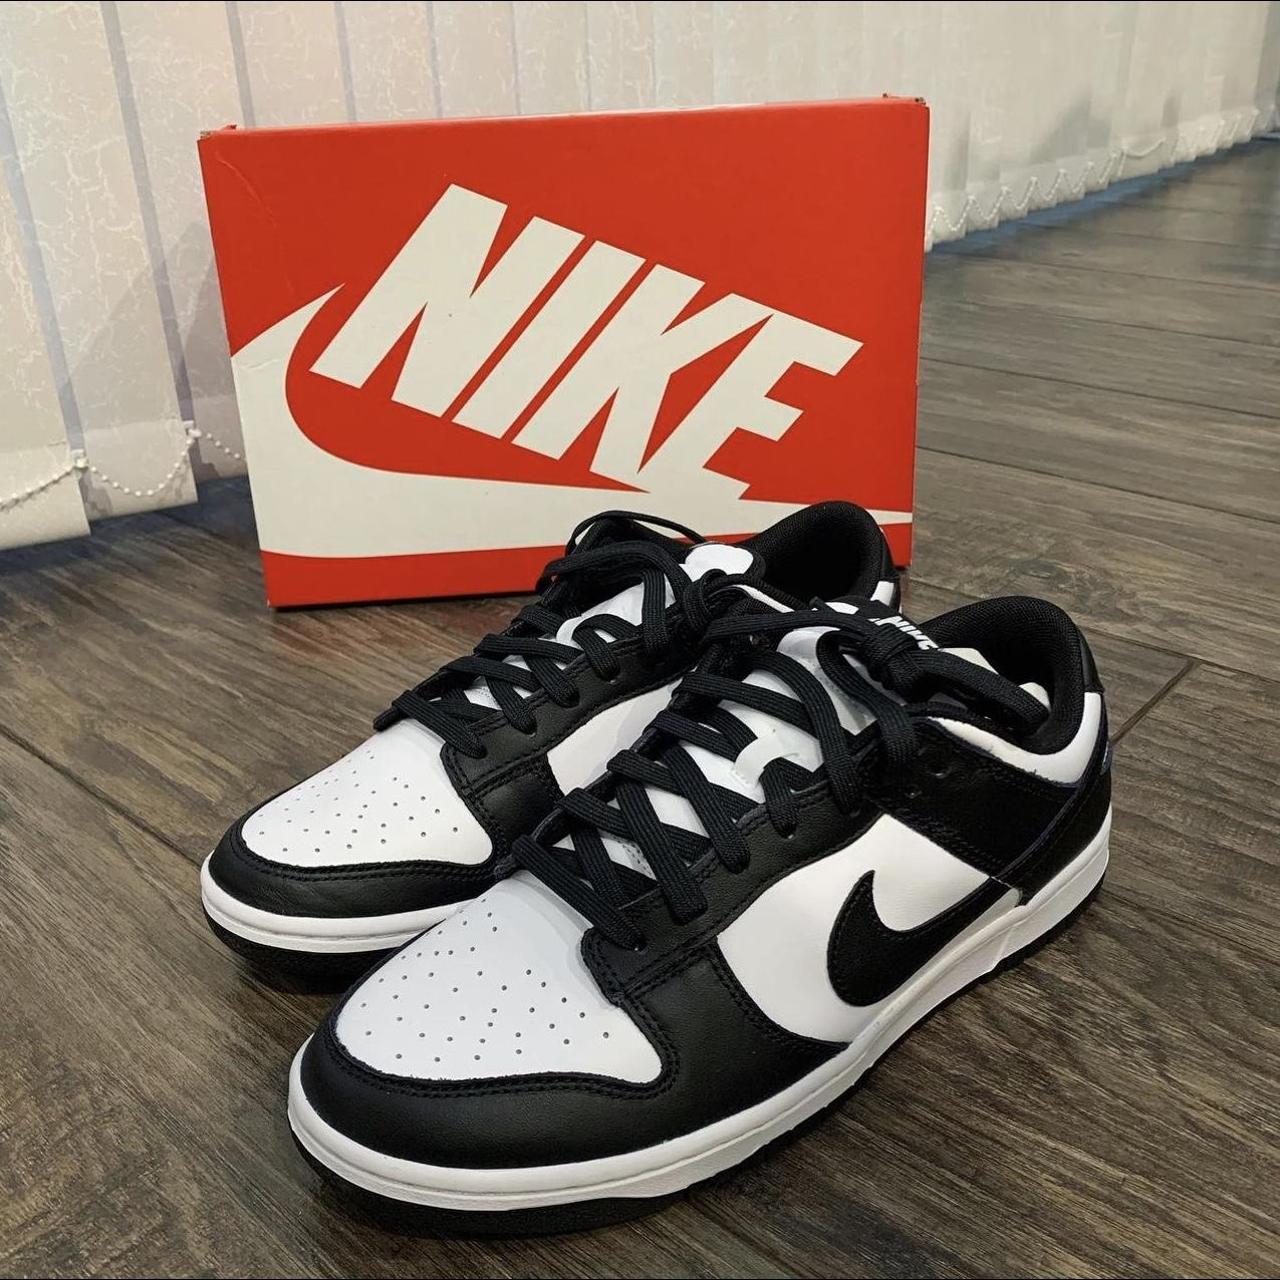 Nike Men's Black and White Trainers | Depop